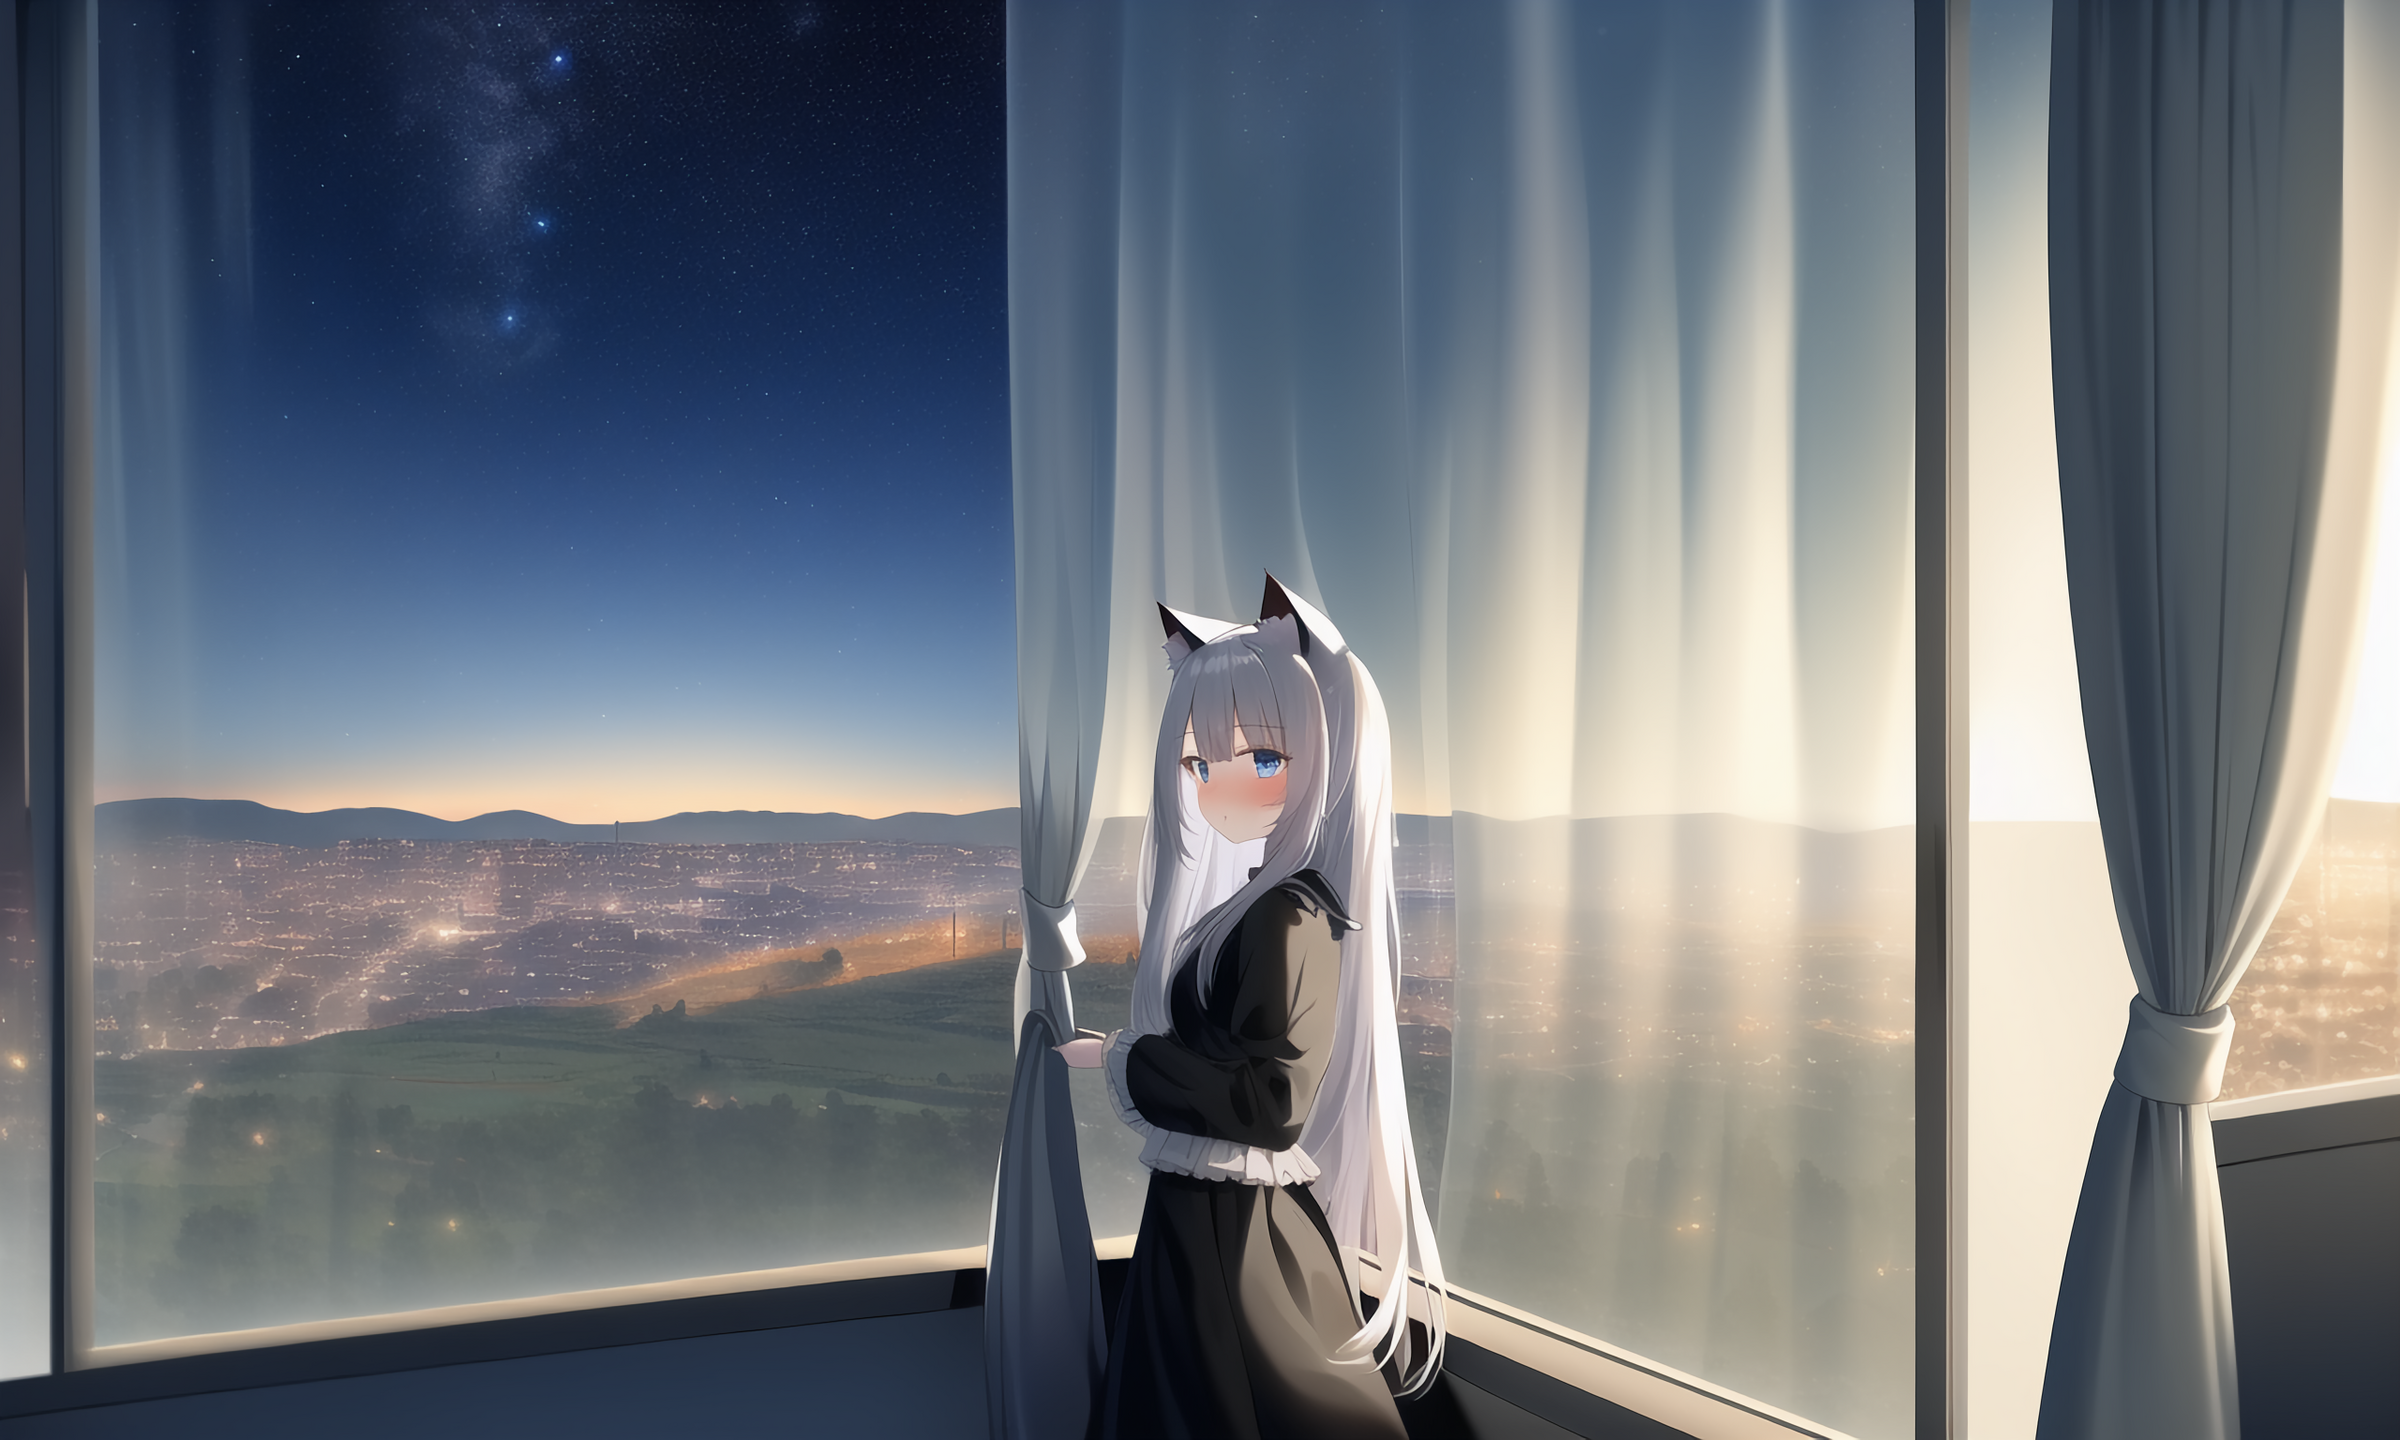 Girl on the window with cat animated Panorama UI Background